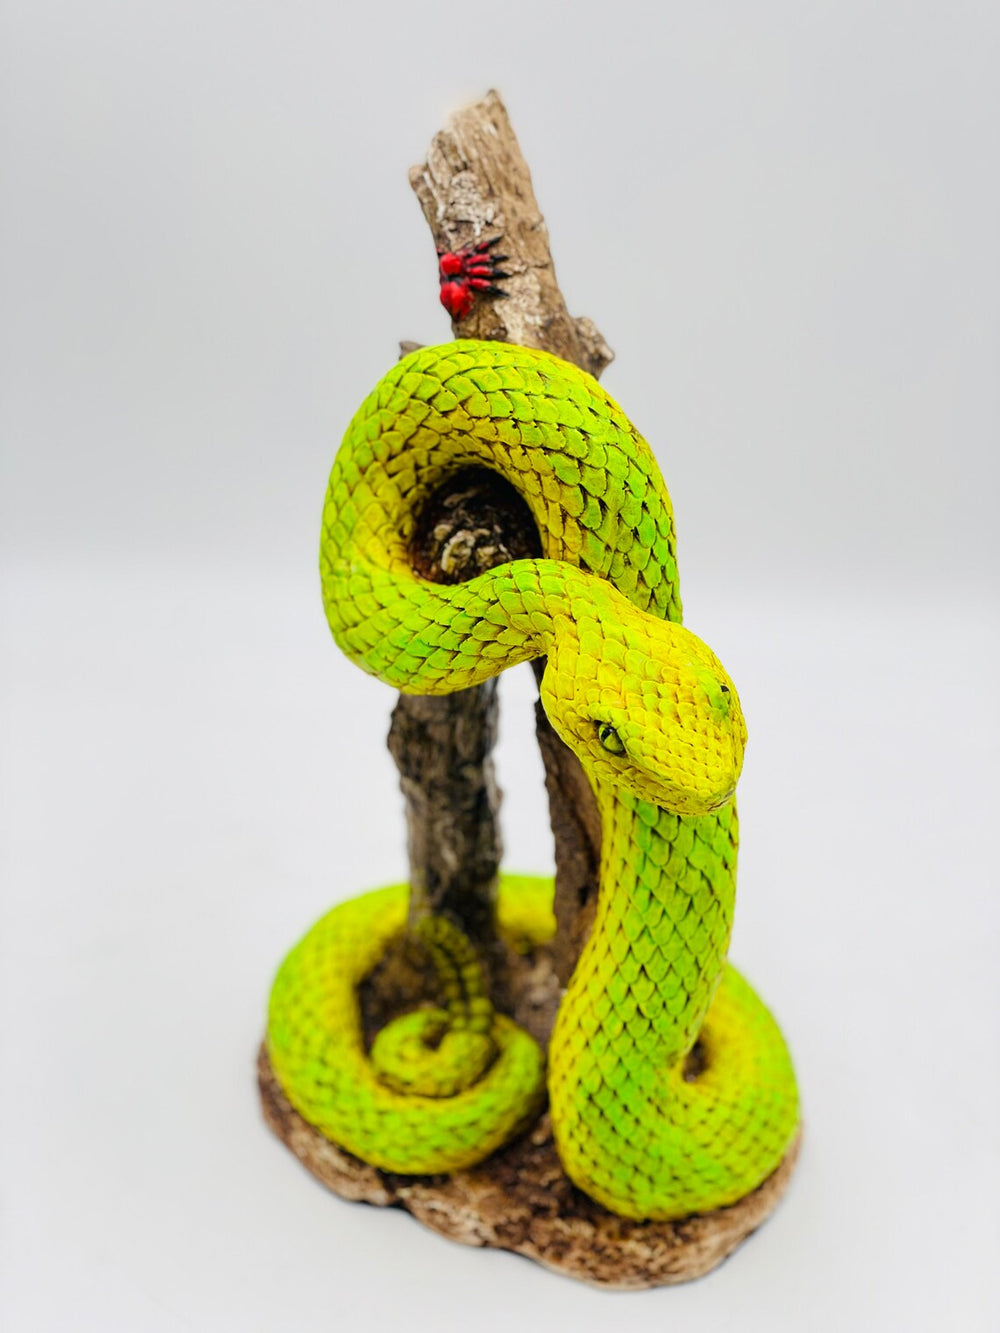 HISS The Green Snake Statue